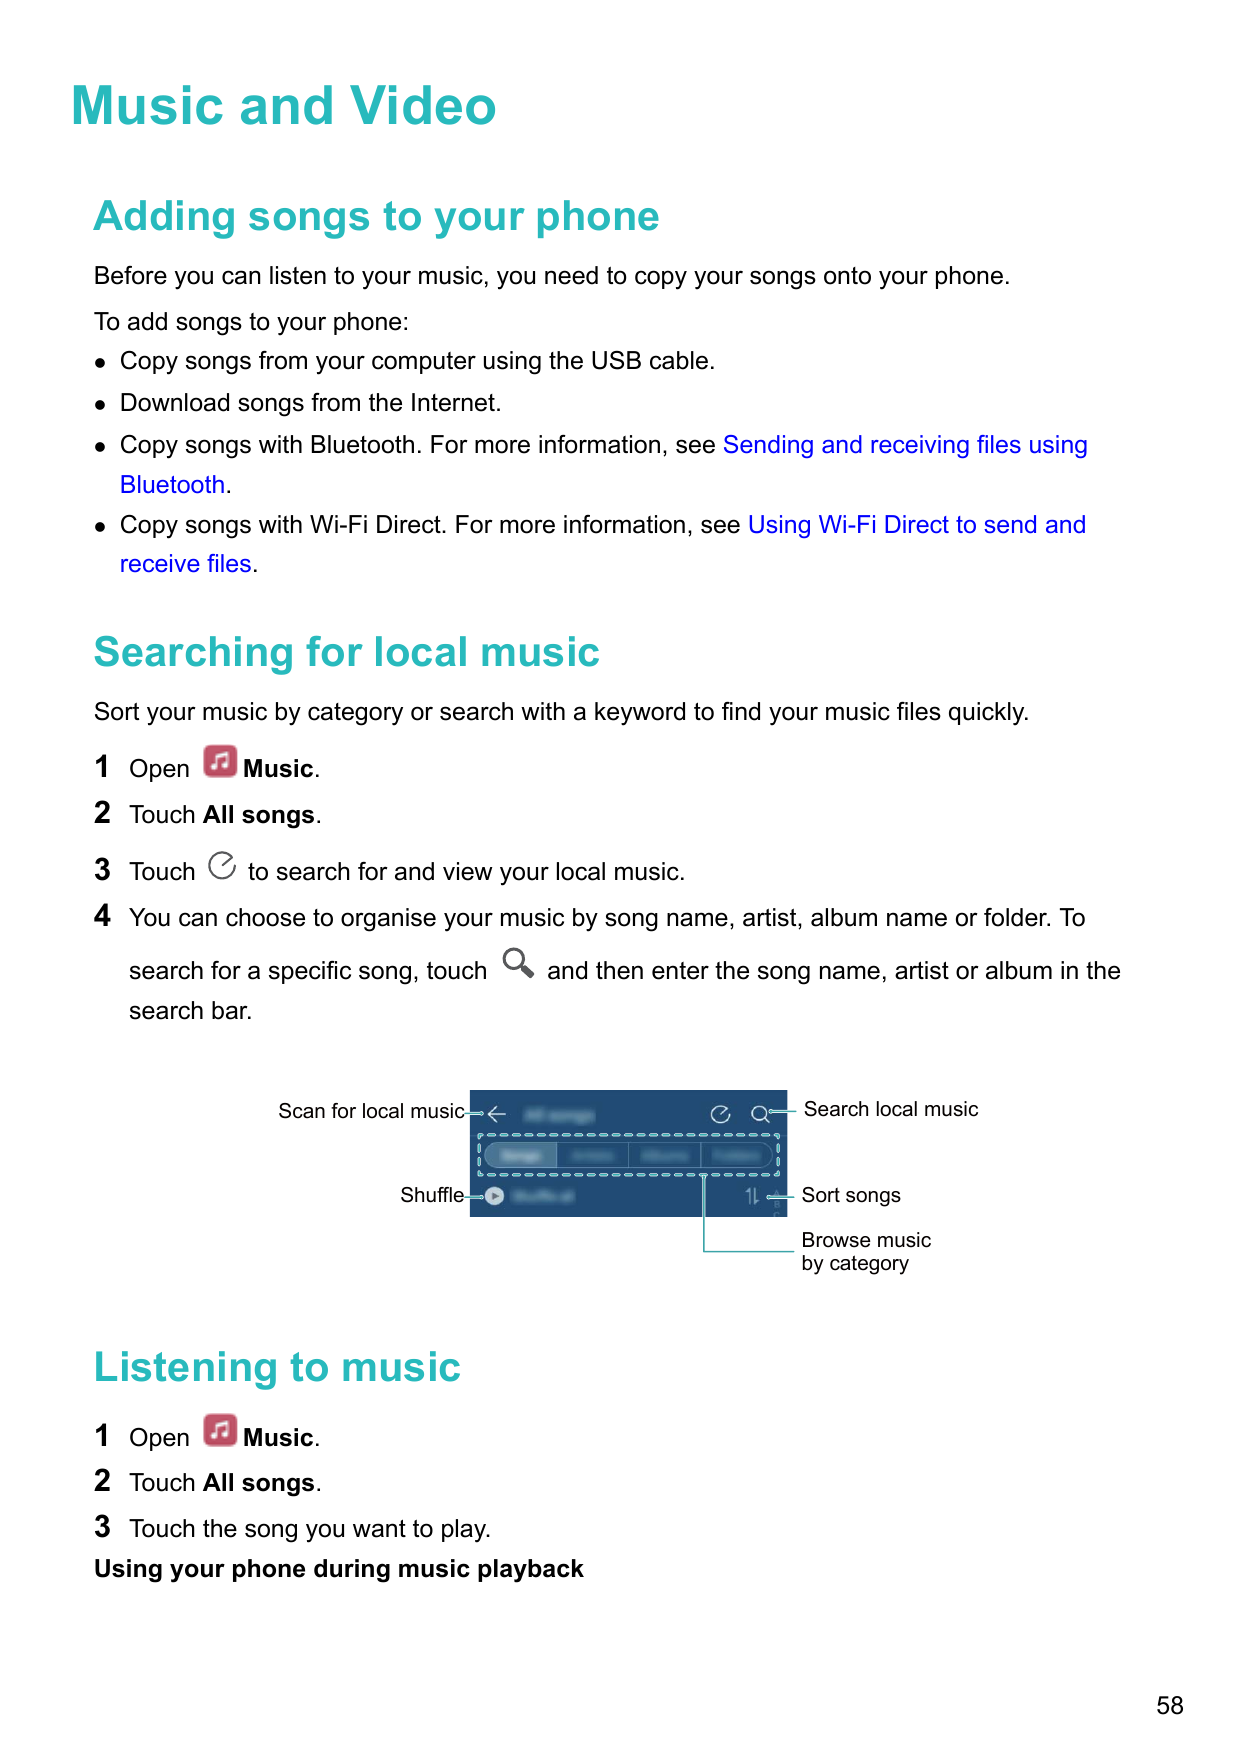 Music and VideoAdding songs to your phoneBefore you can listen to your music, you need to copy your songs onto your phone.To add